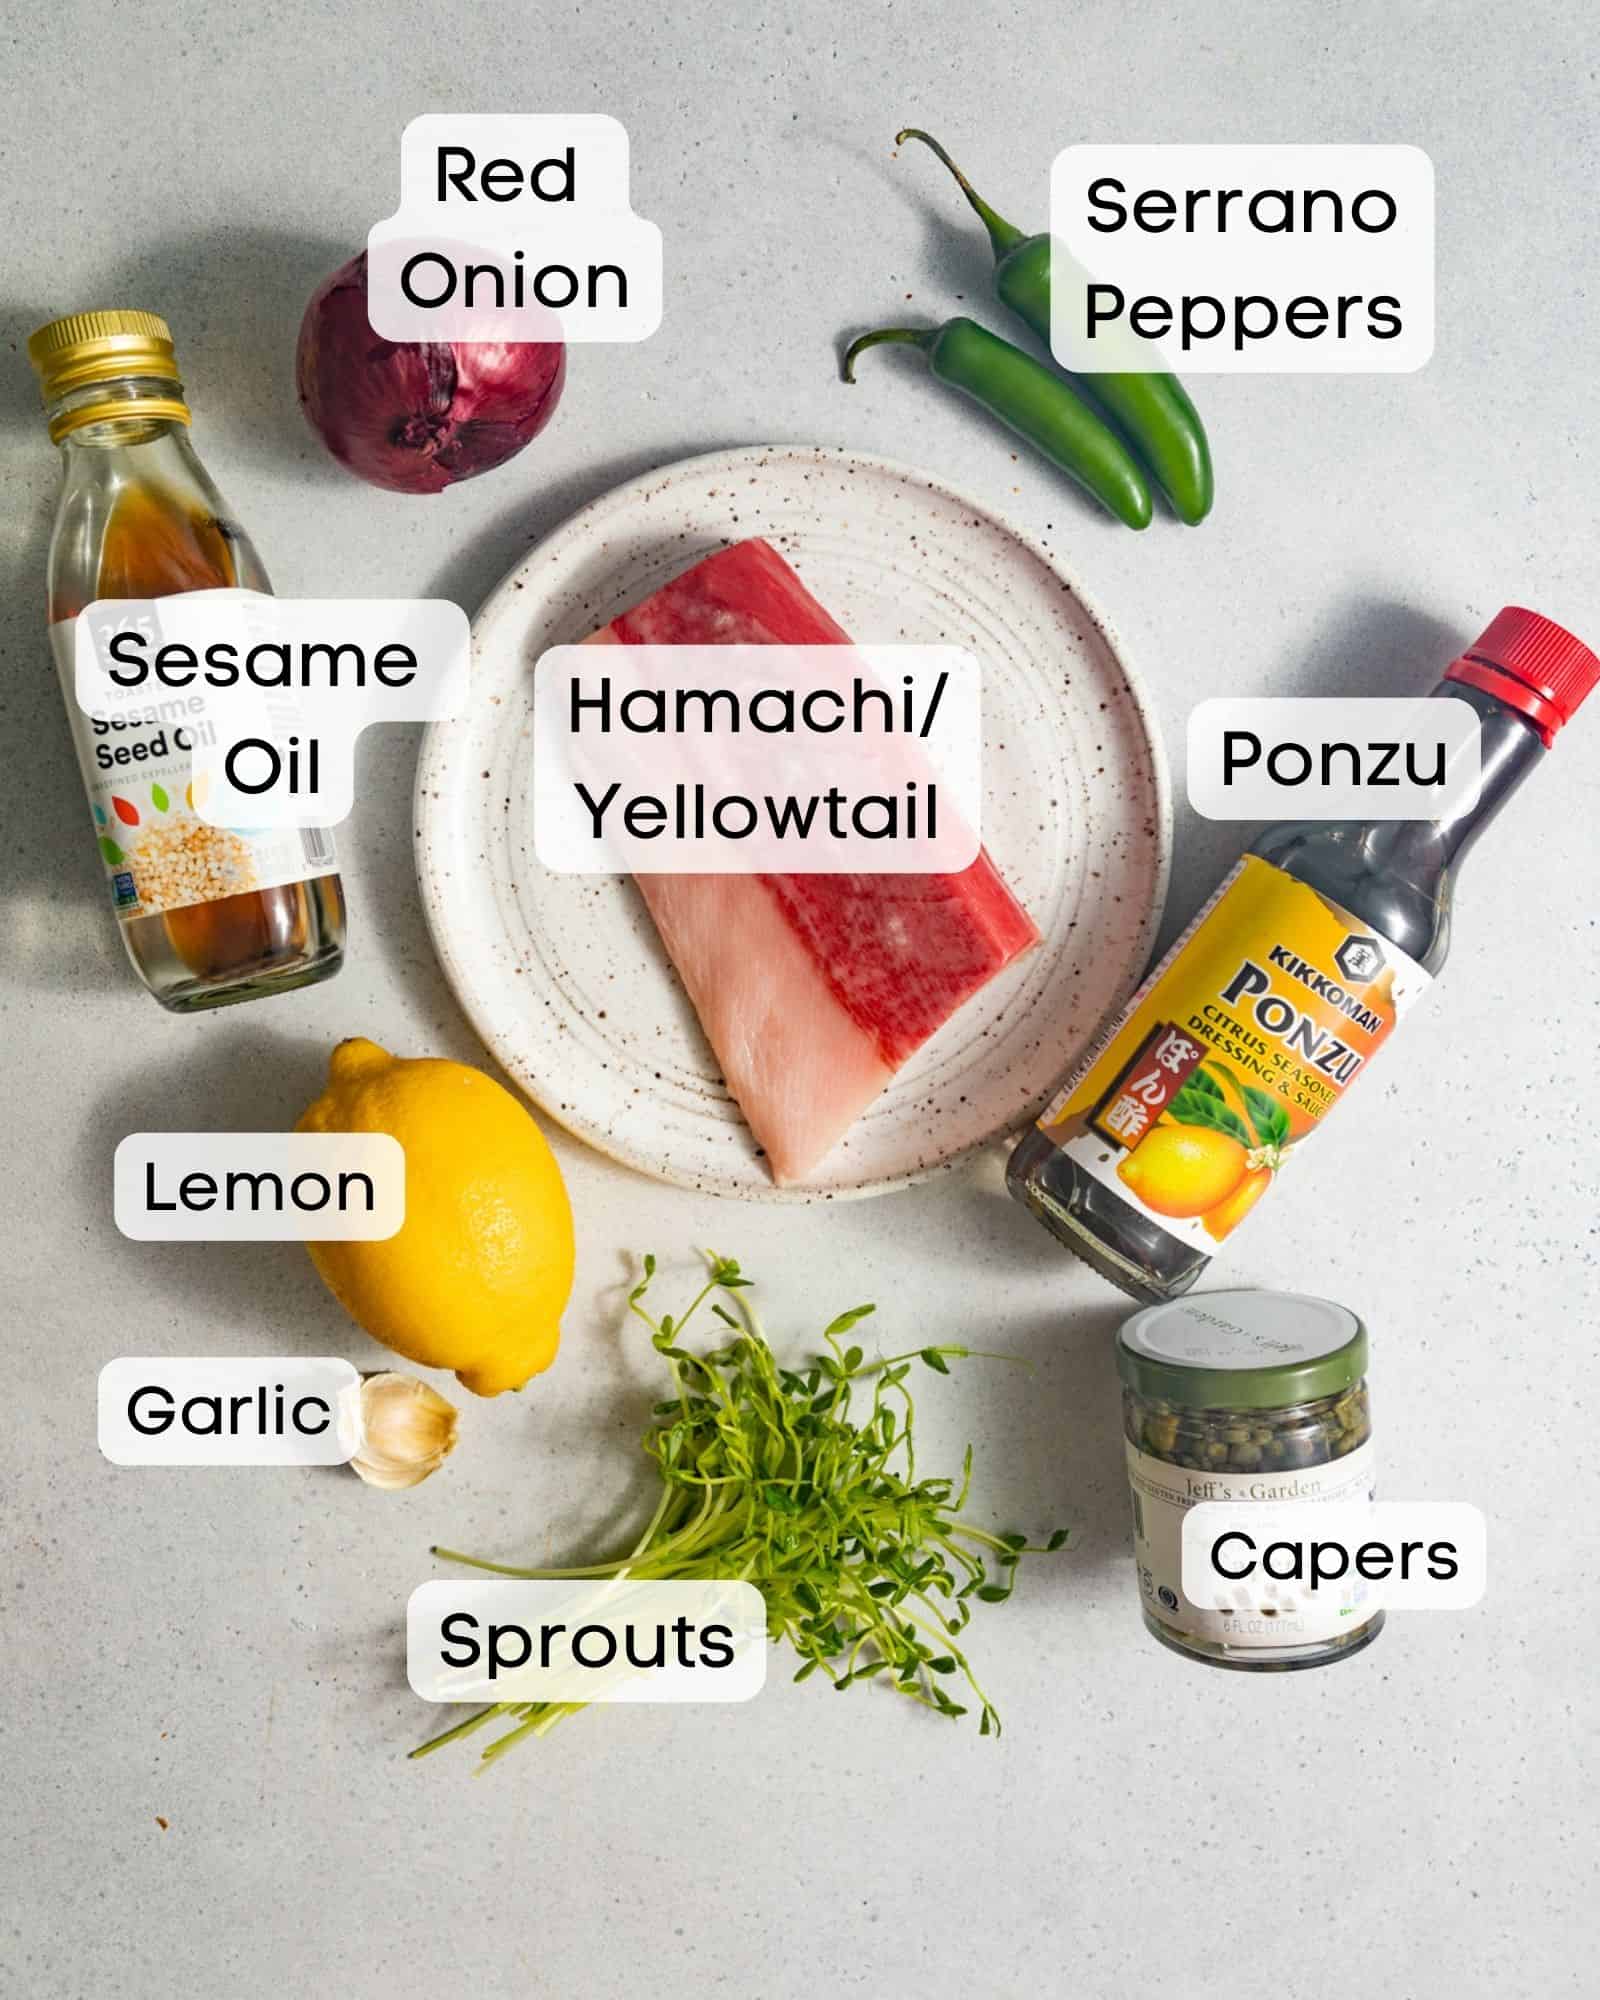 ingredients to make hamachi crudo - hamachi yellowtail, ponzu, sprouts, capers, lemon, garlic, soy sauce, red onion, sesame oil, and serrano peppers.